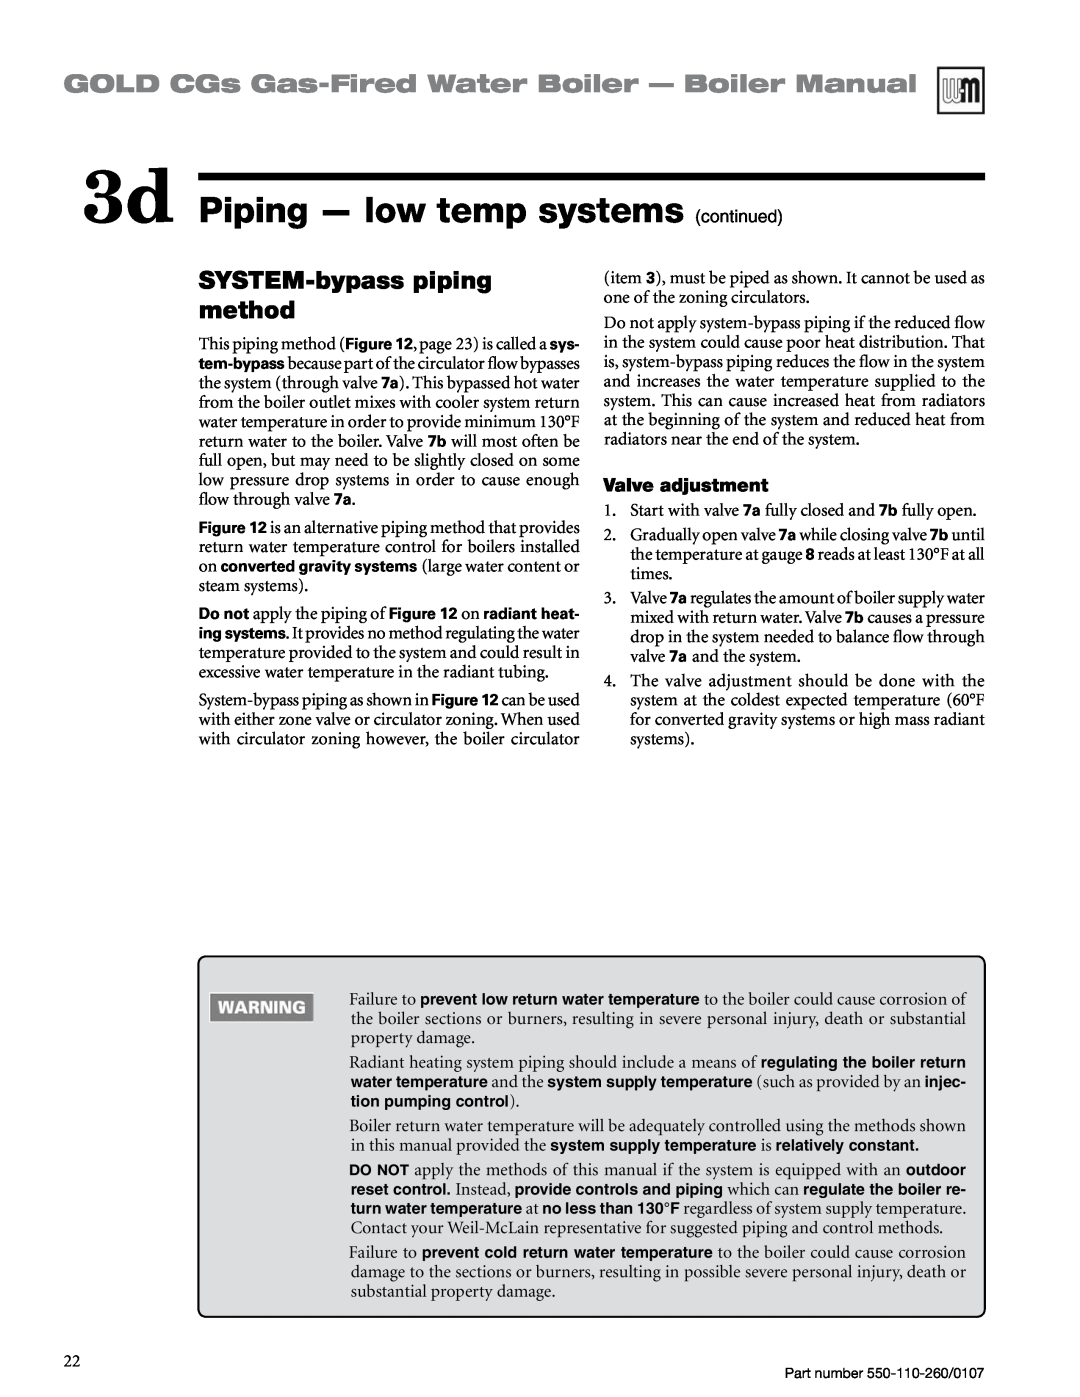 Weil-McLain 550-110-260/0107 manual SYSTEM-bypasspiping method, 3d Piping — low temp systems continued, Valve adjustment 